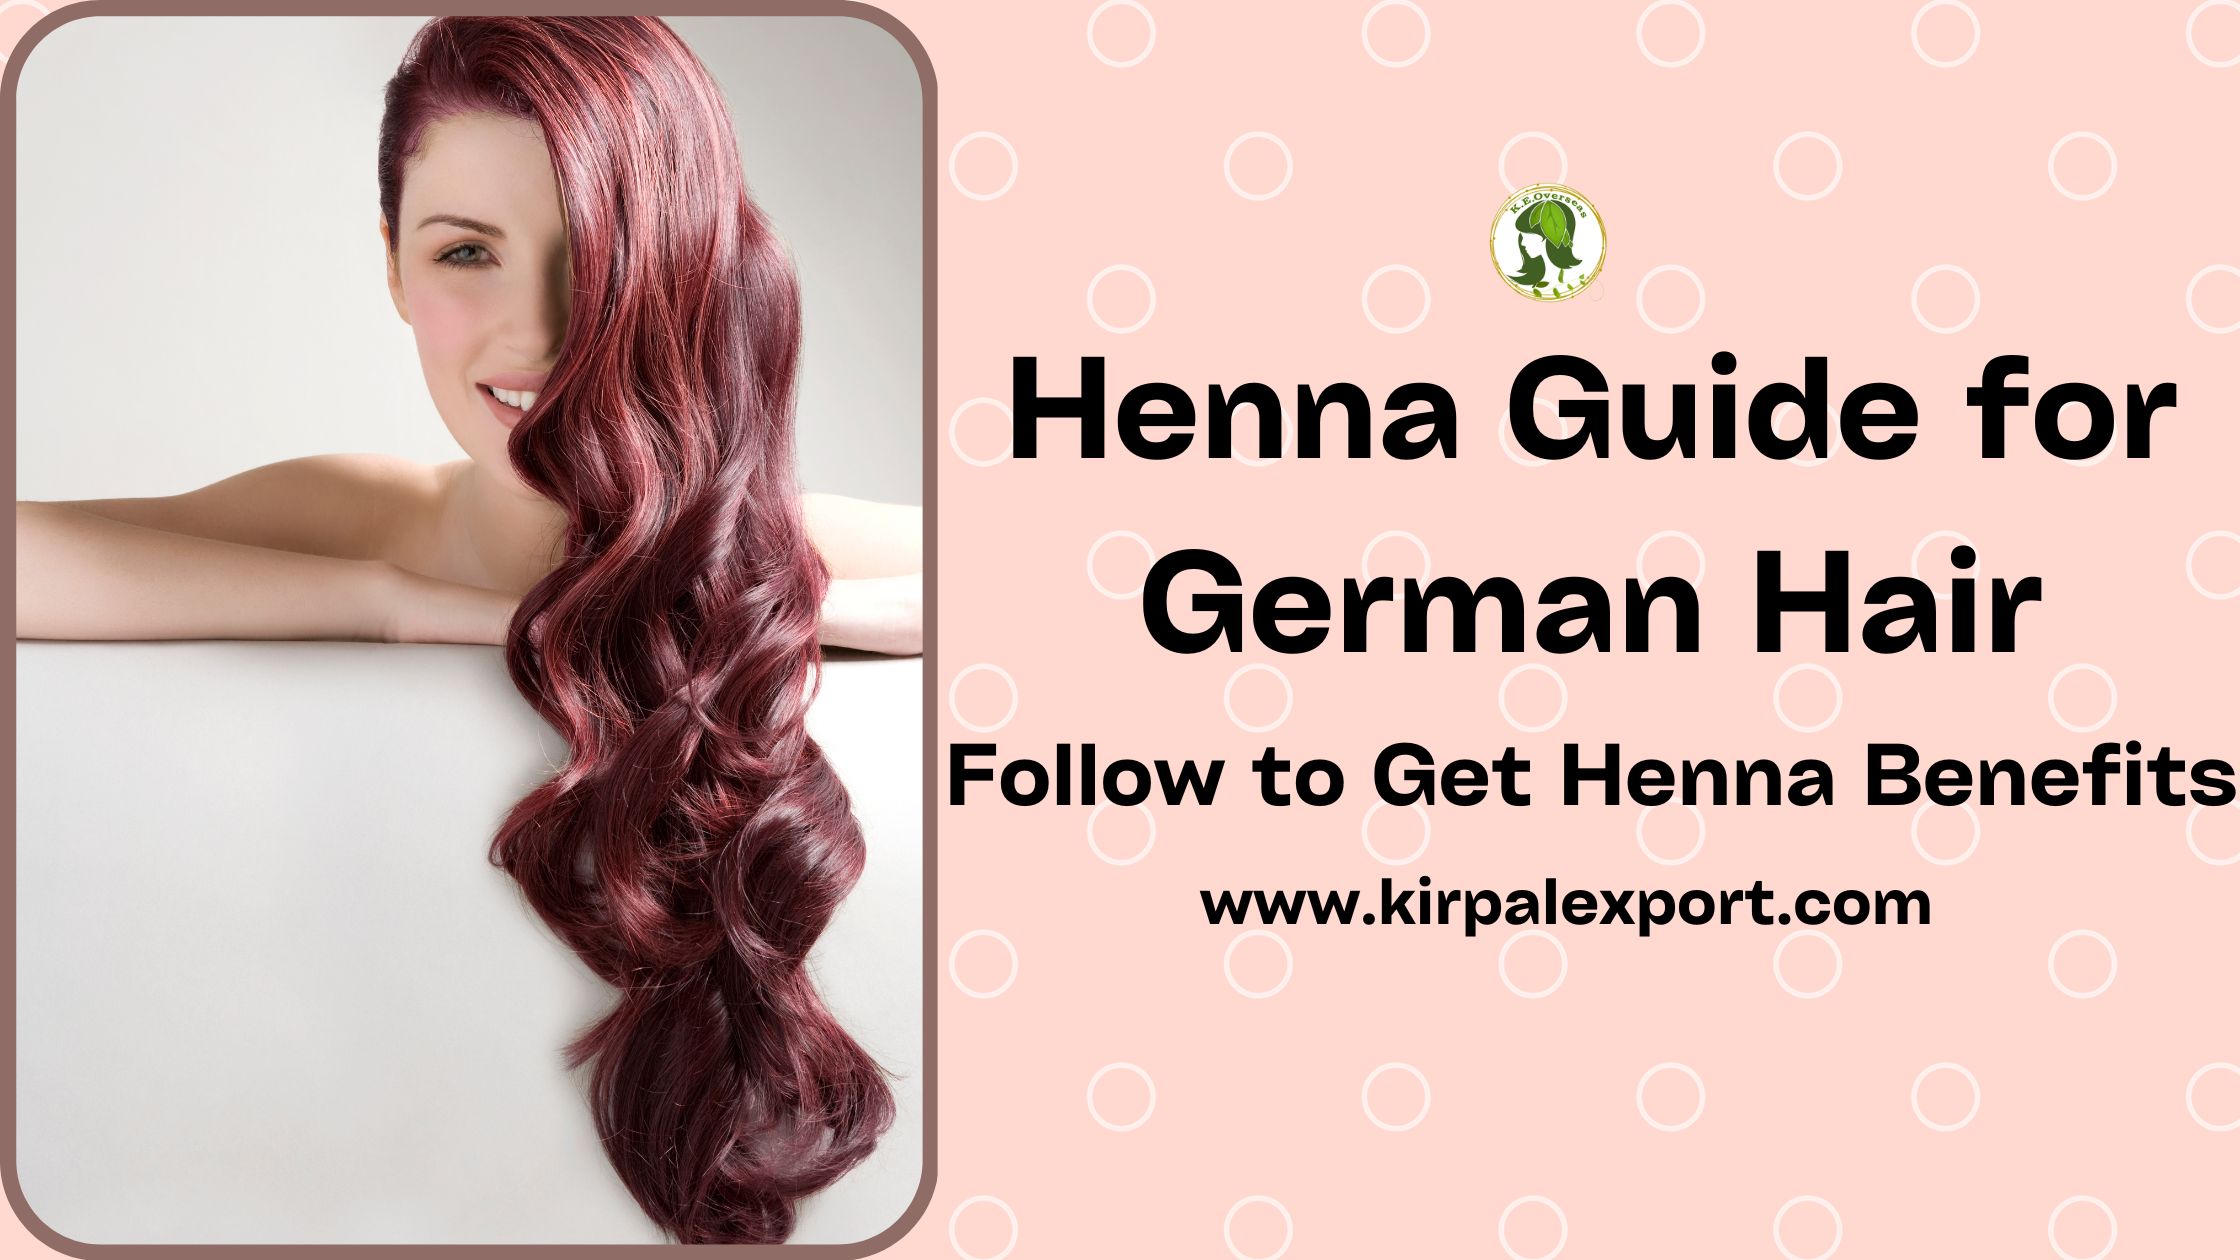 The Complete Henna Guide for German Hair-Follow to Get Henna Benefits